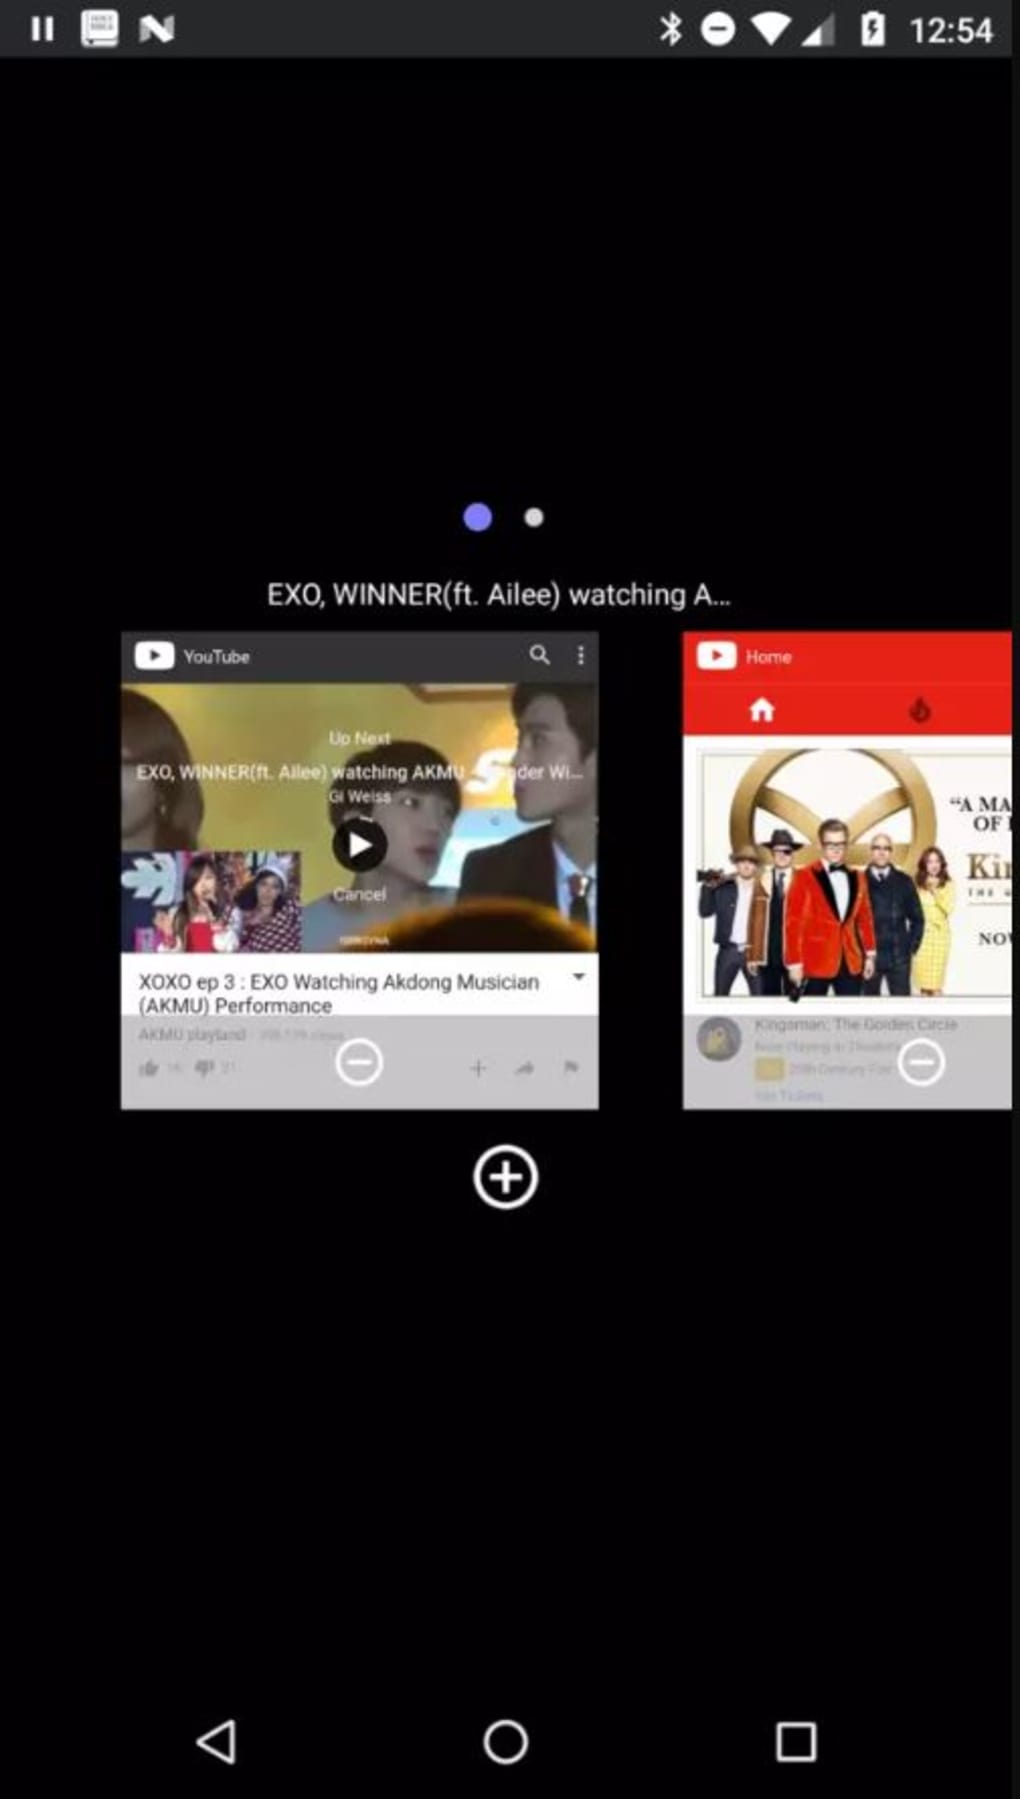 Tubemate Free Download For Android 4.1.1